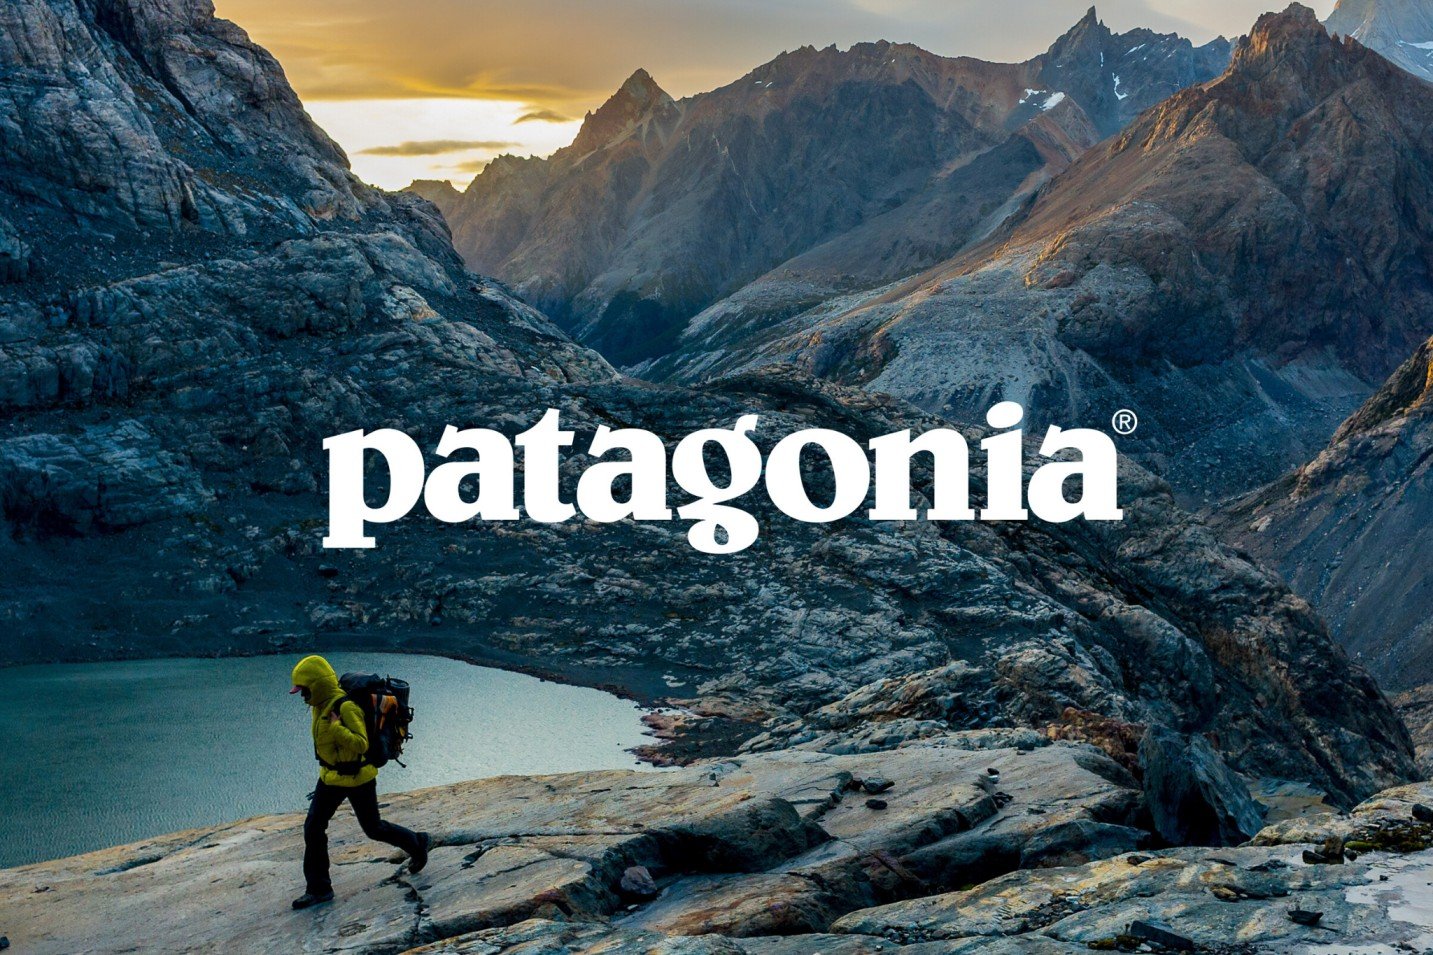 THE BRAND STORY OF PATAGONIA - Brand The Change